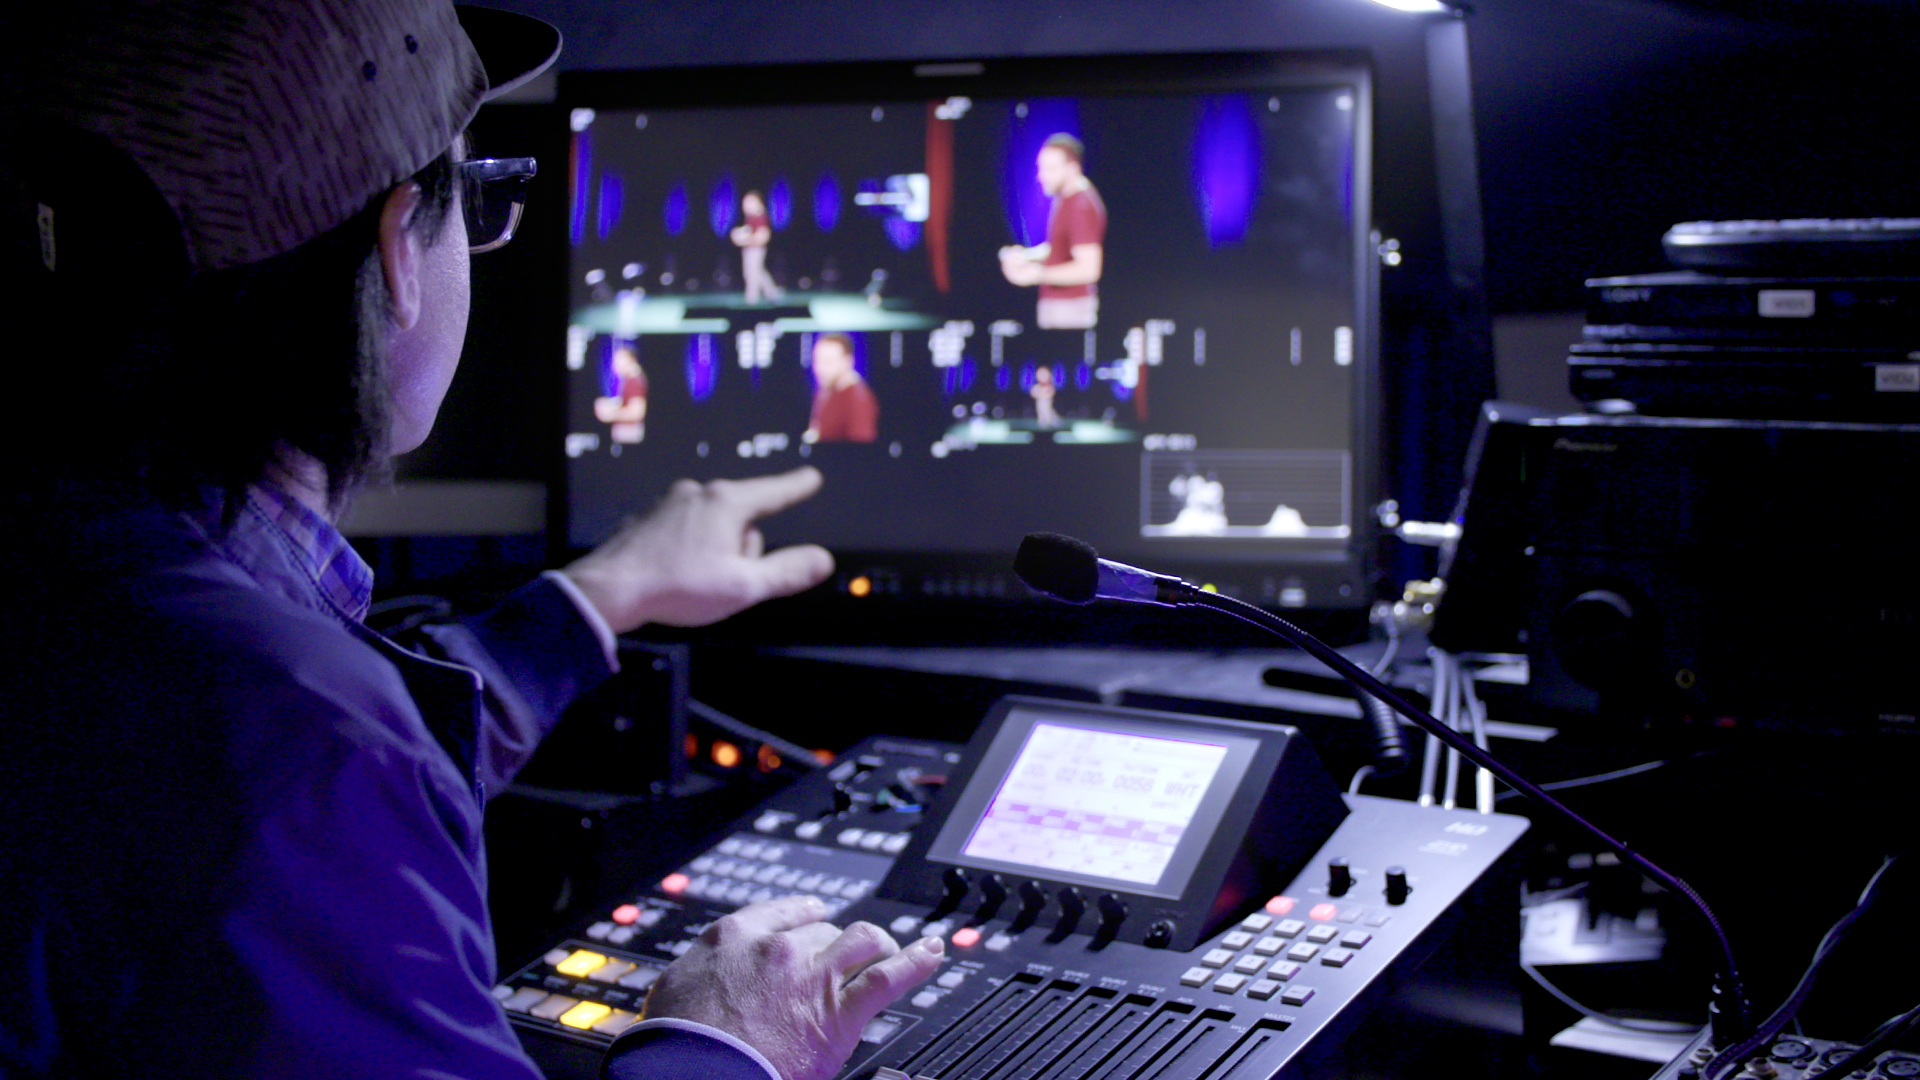 High-quality video productions with over 25 years of experience